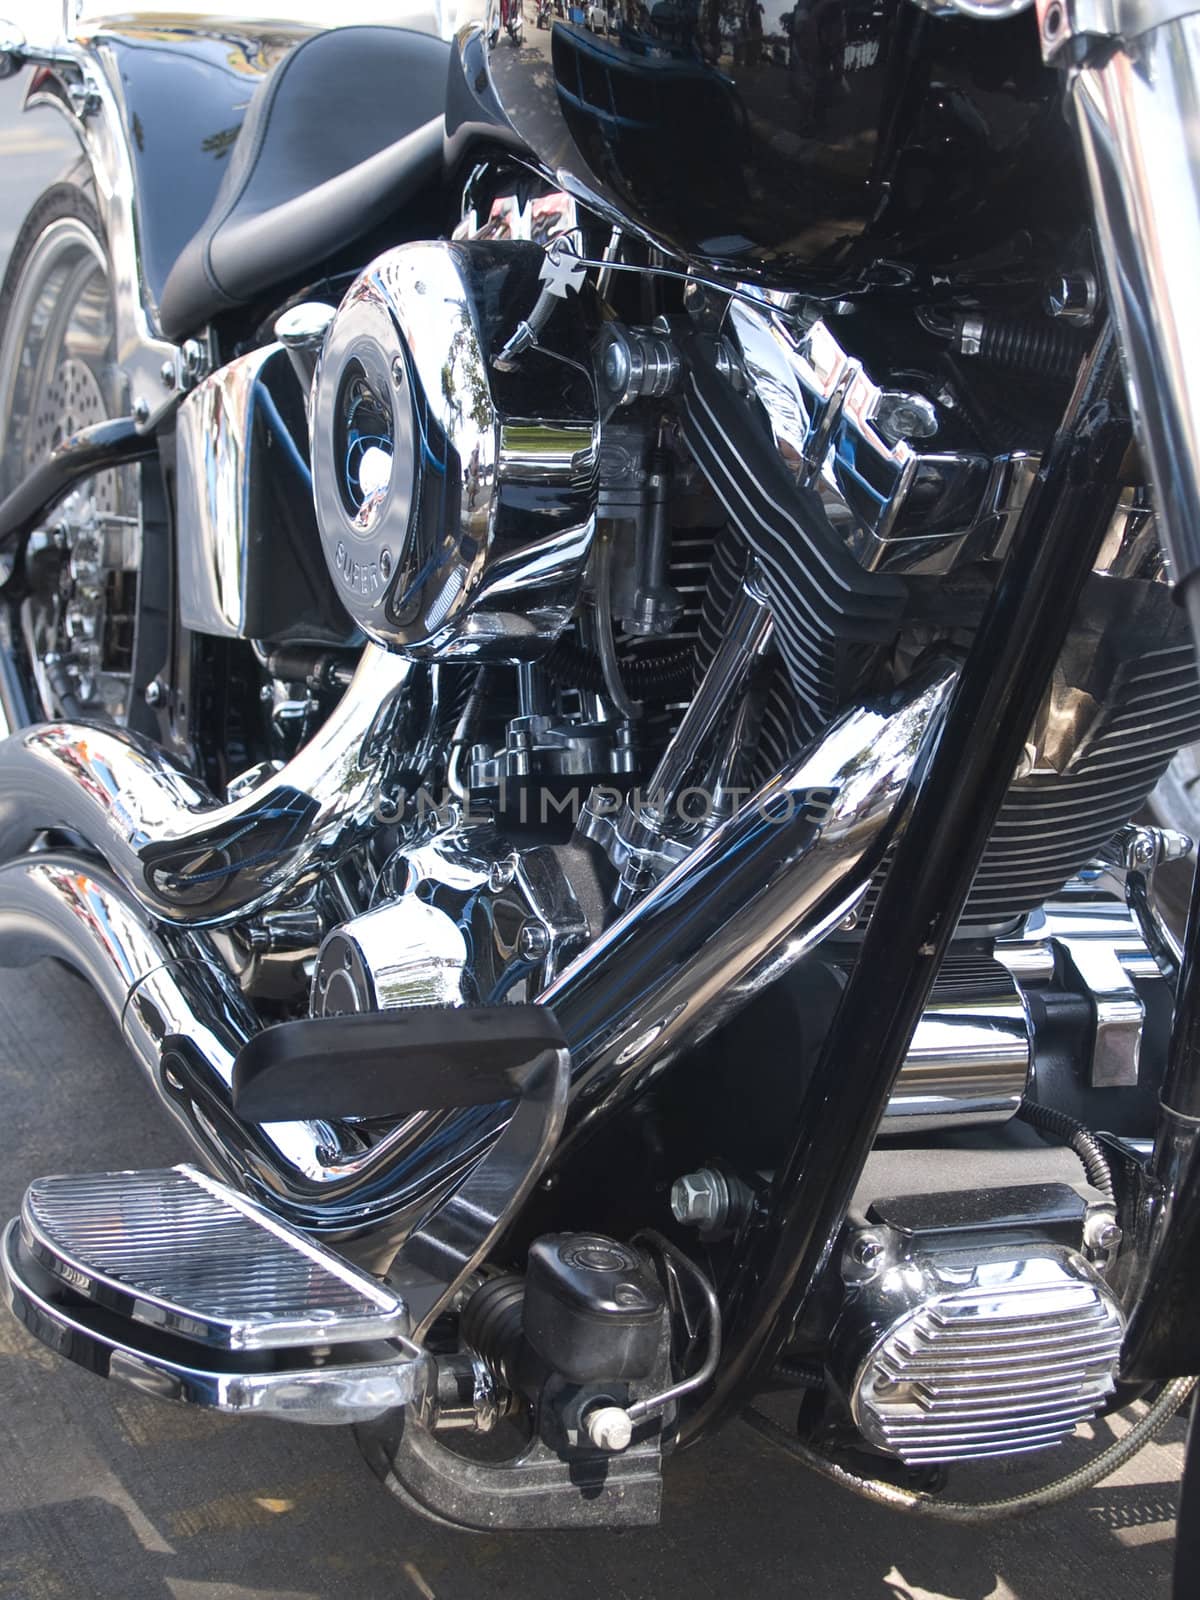 Chrome engine of custom built, heavy motorcycle with lots of chrome